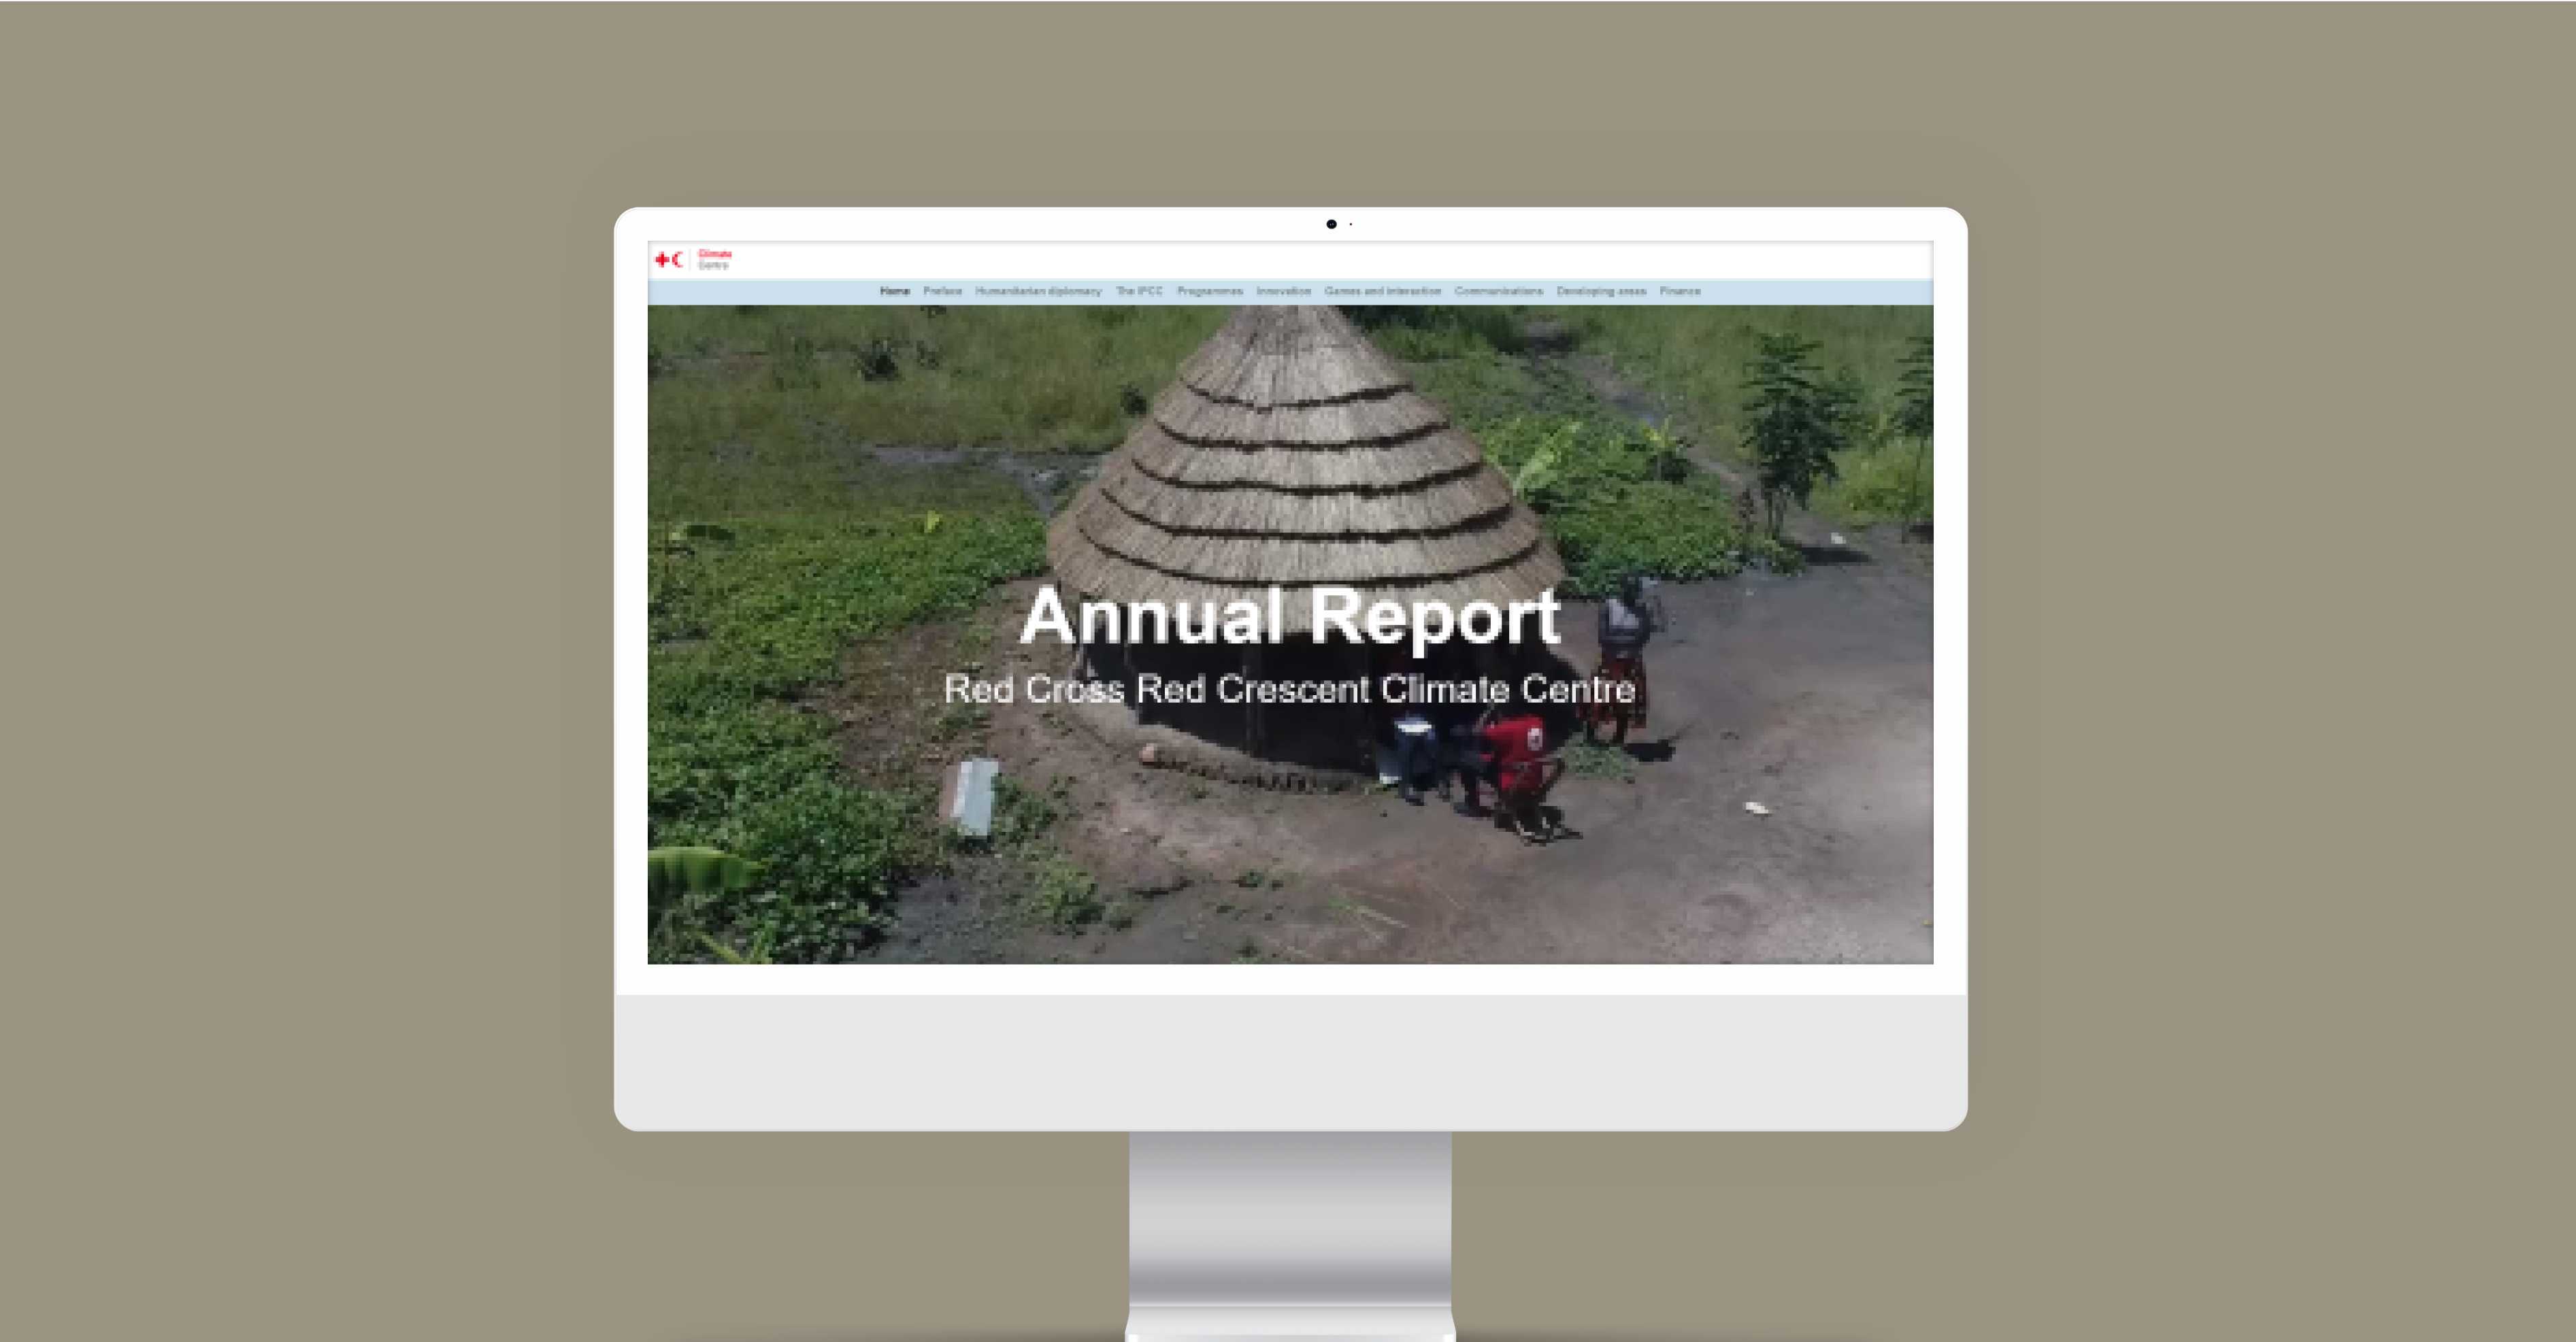 How to write an annual report